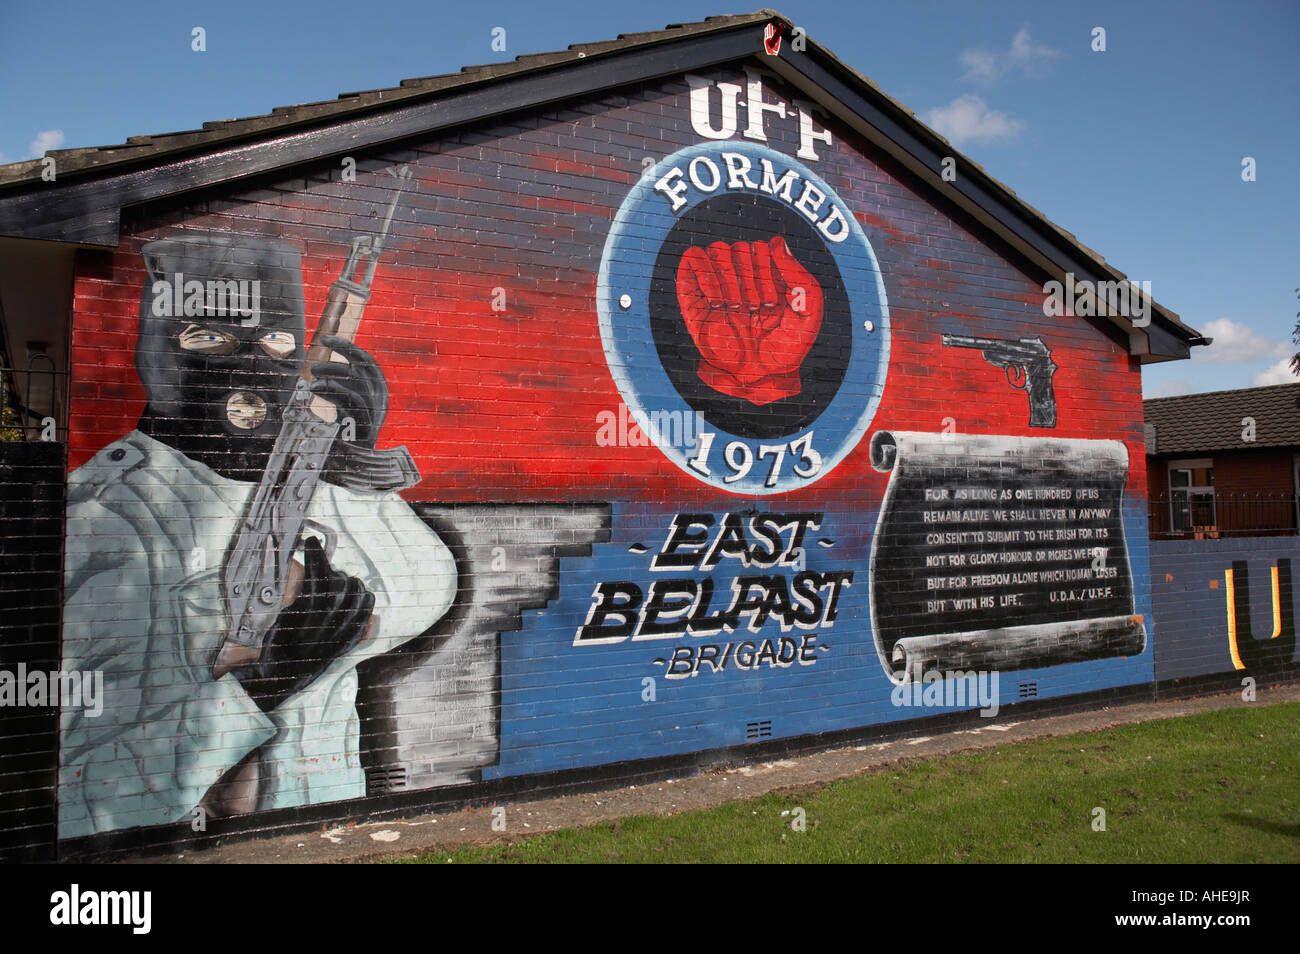 loyalist murals in Lower Newtownards Road area of protestant East Belfast Northern Ireland . UFF Ulster Freedom Fighters mural Stock Photo